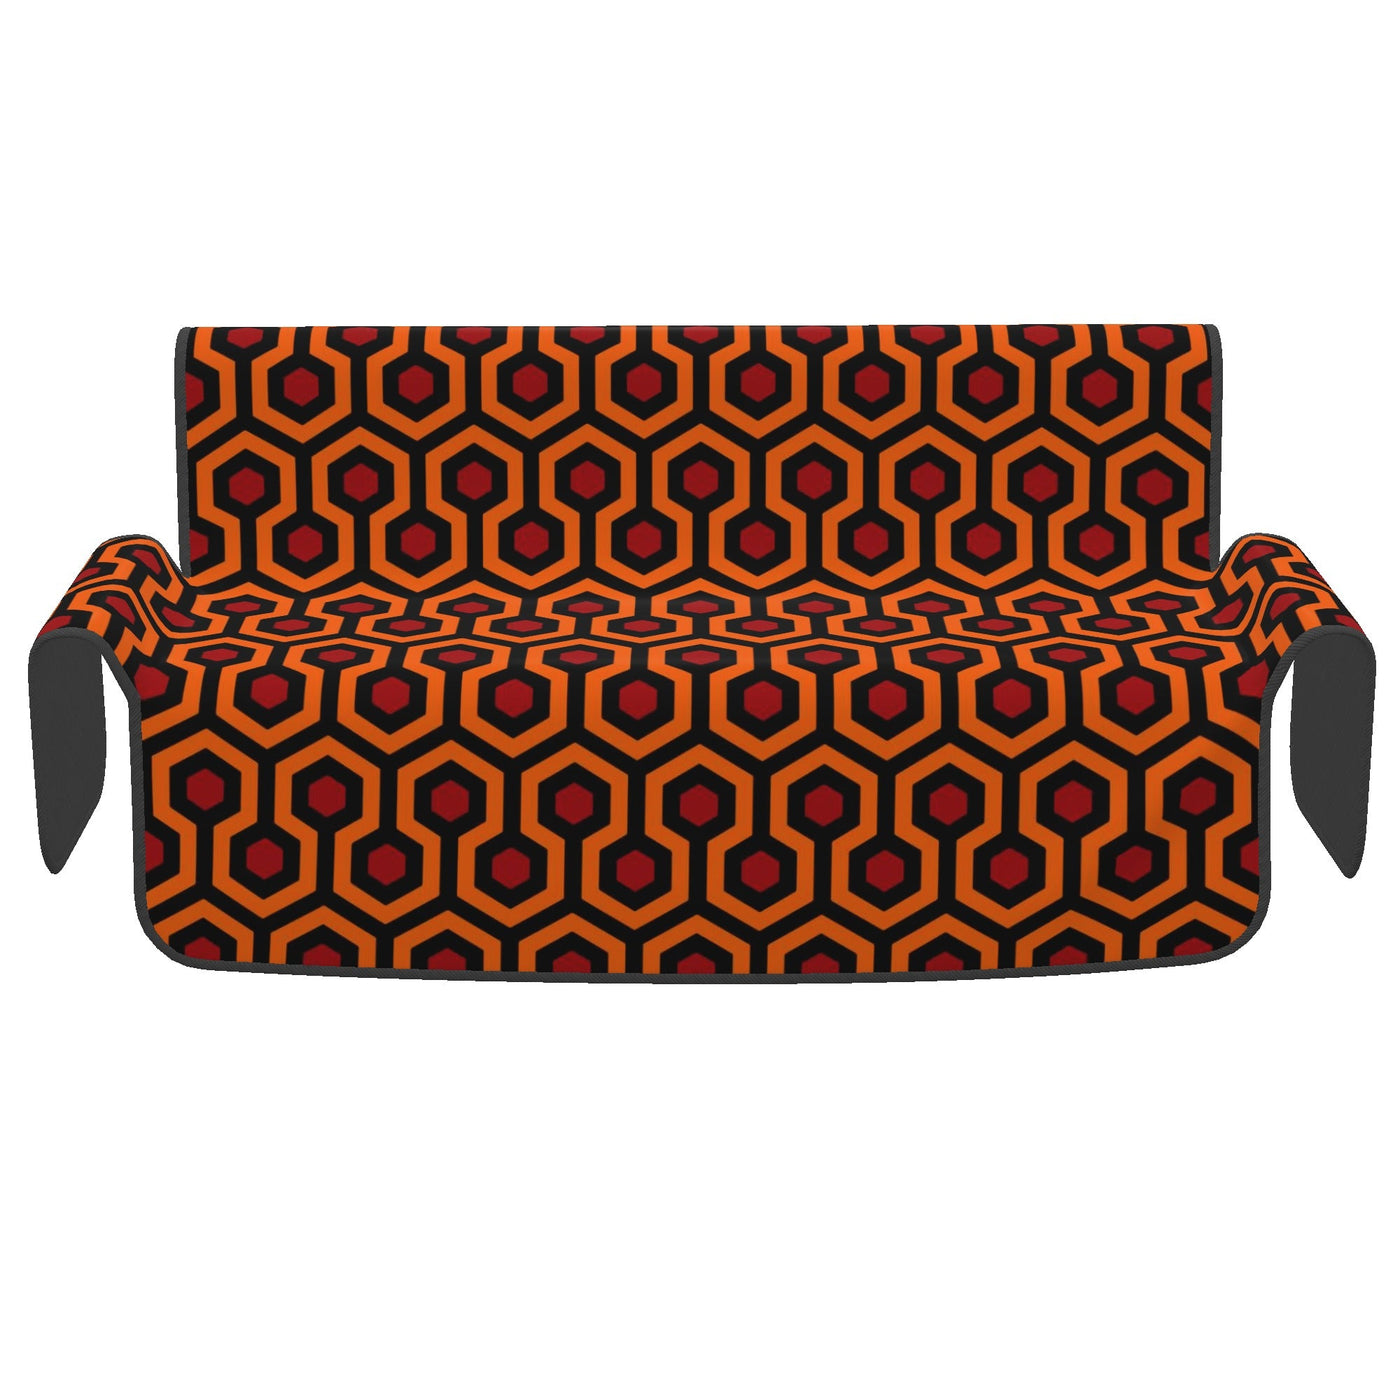 The Shining - Overlook Hotel Carpet Pattern 78 Sofa Protector Cover